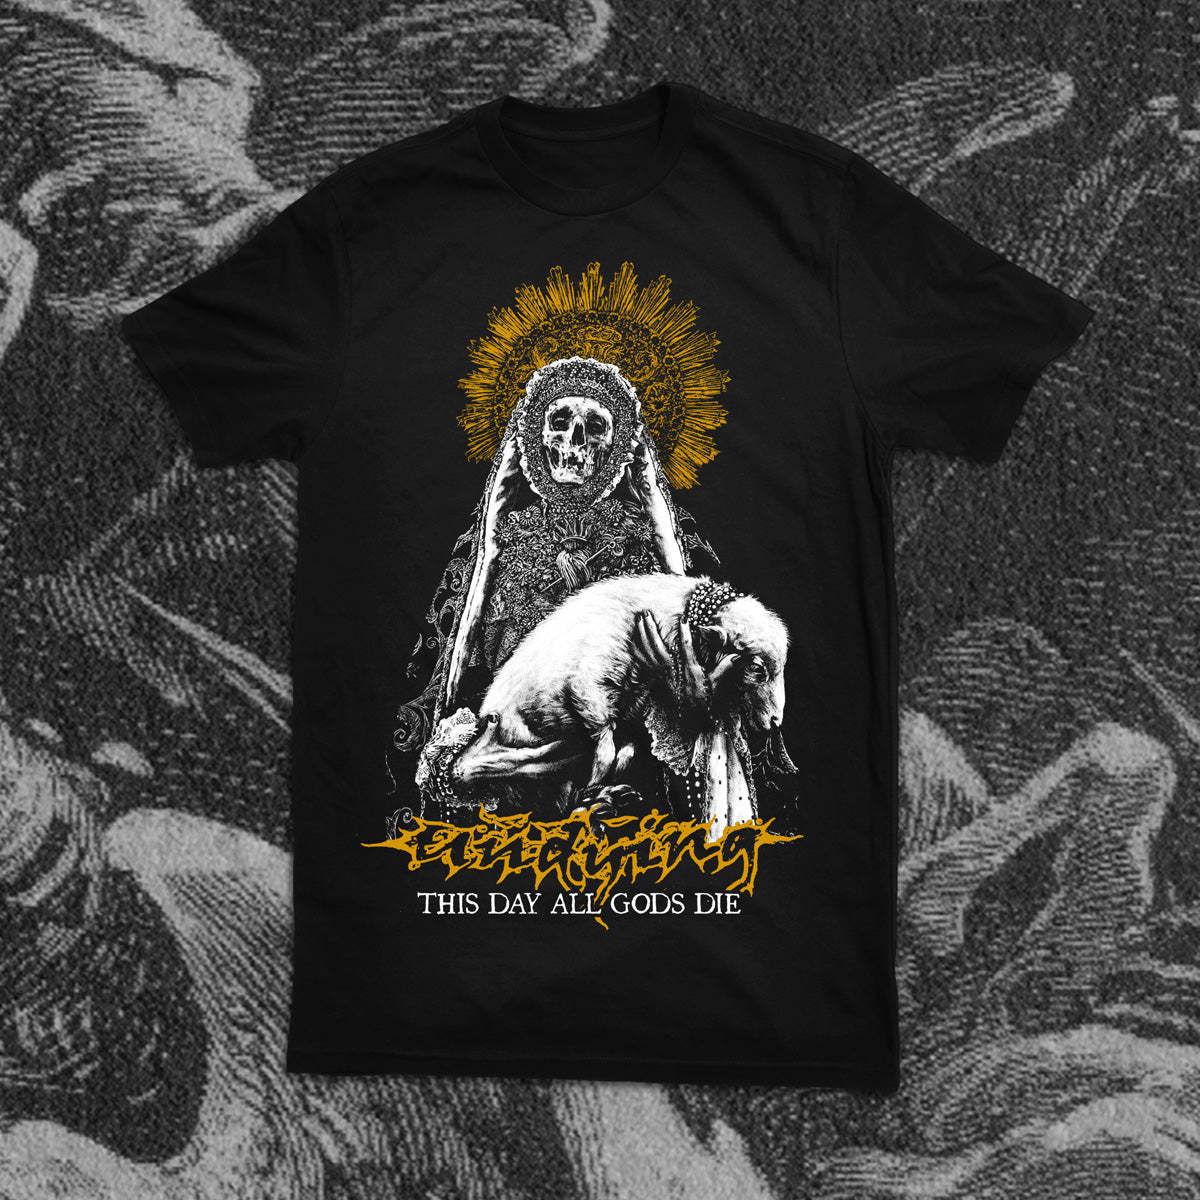 UNDYING "THIS DAY ALL GODS DIE" SHIRT